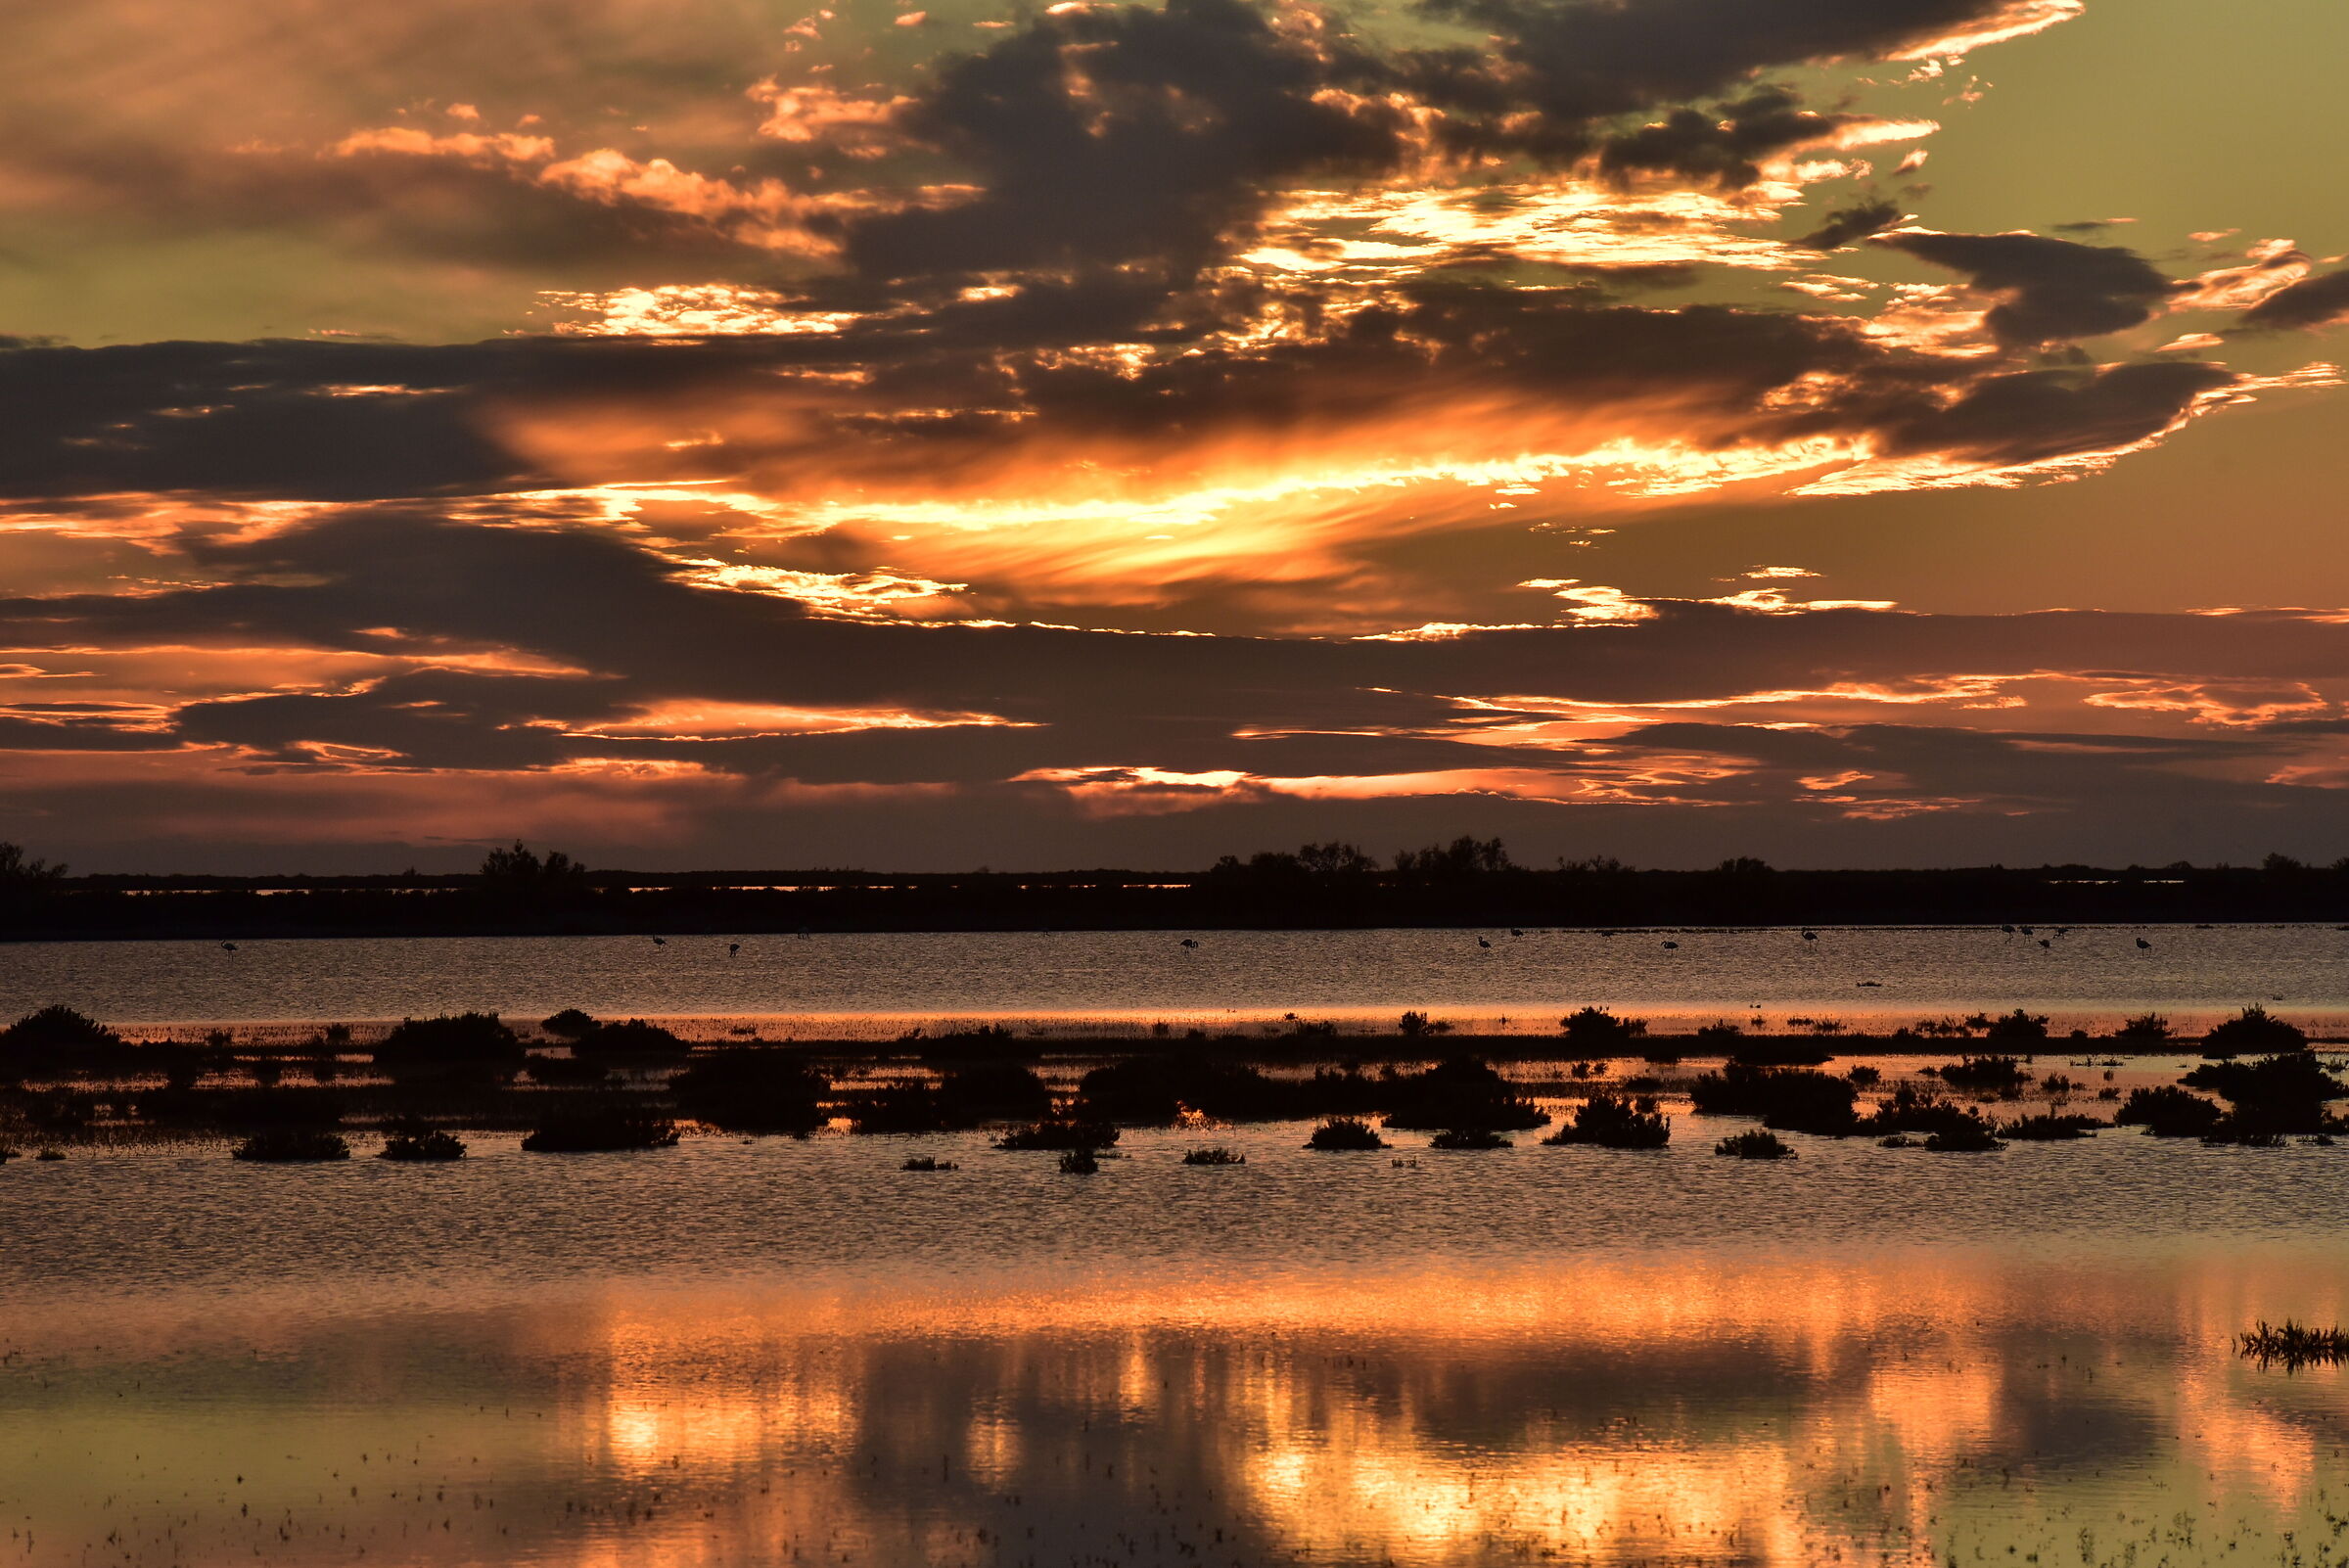 Sunset over the ponds of Camargue...